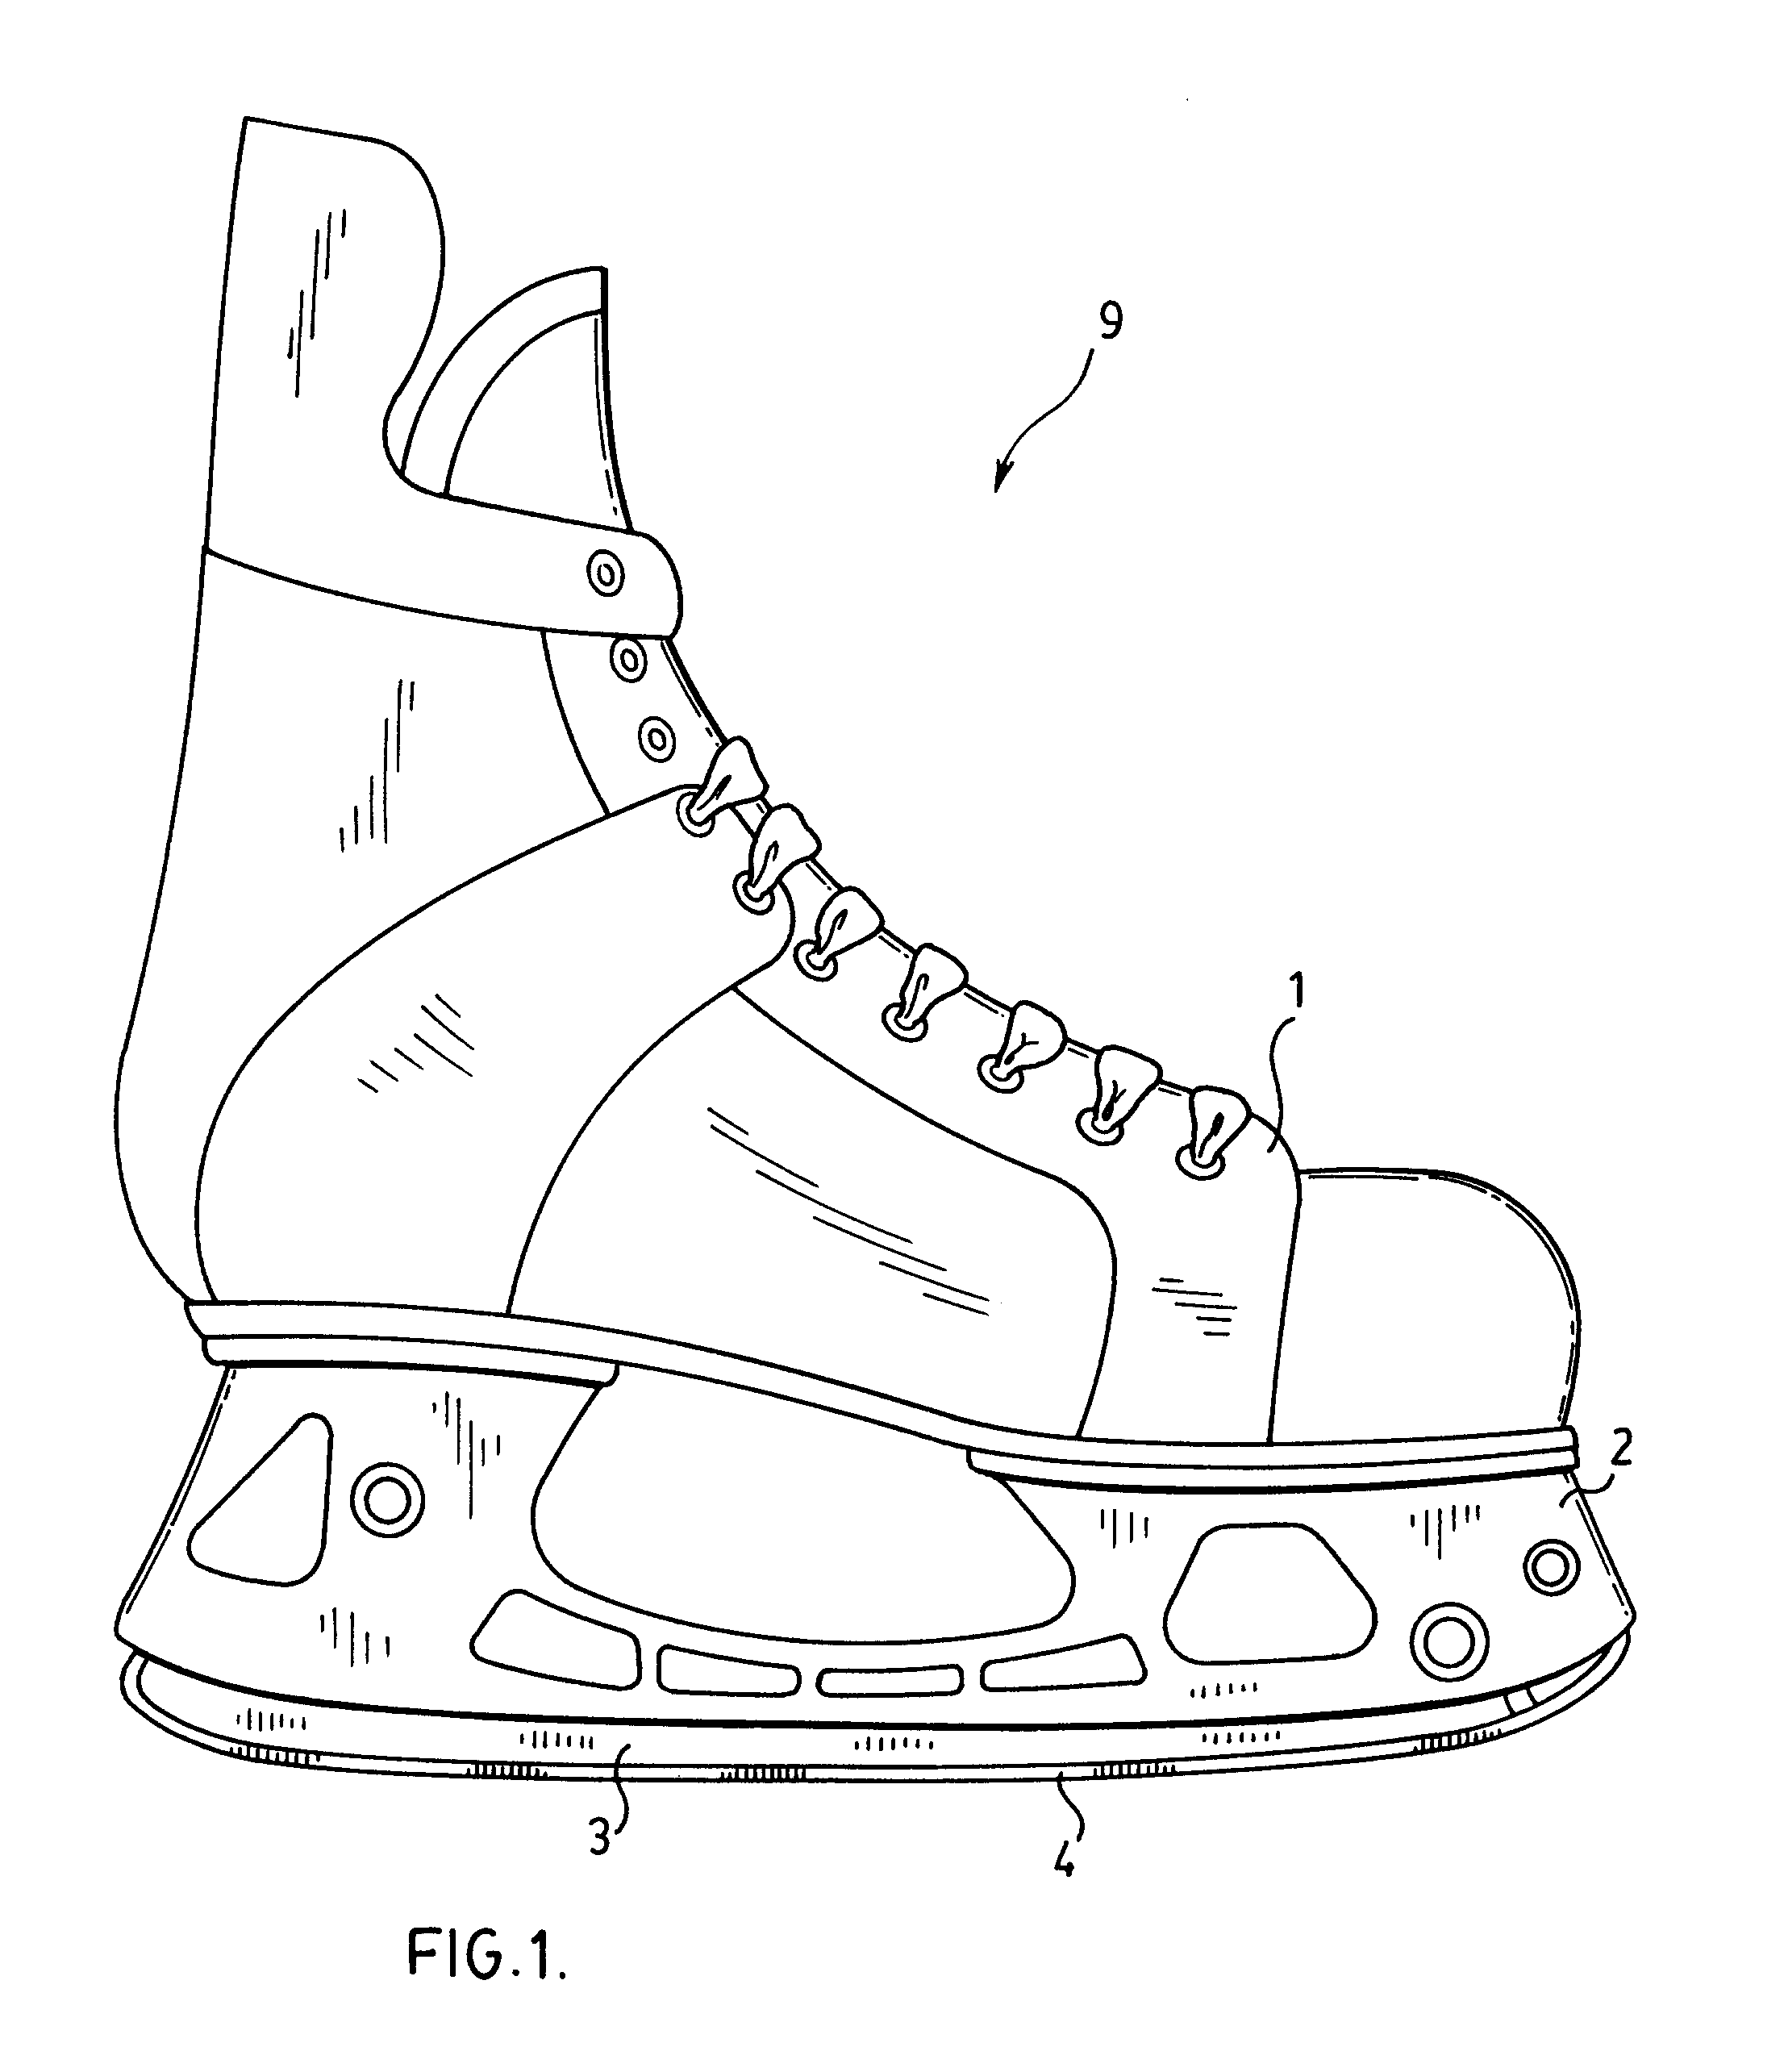 Skate with pivoting rocker and replaceable blade